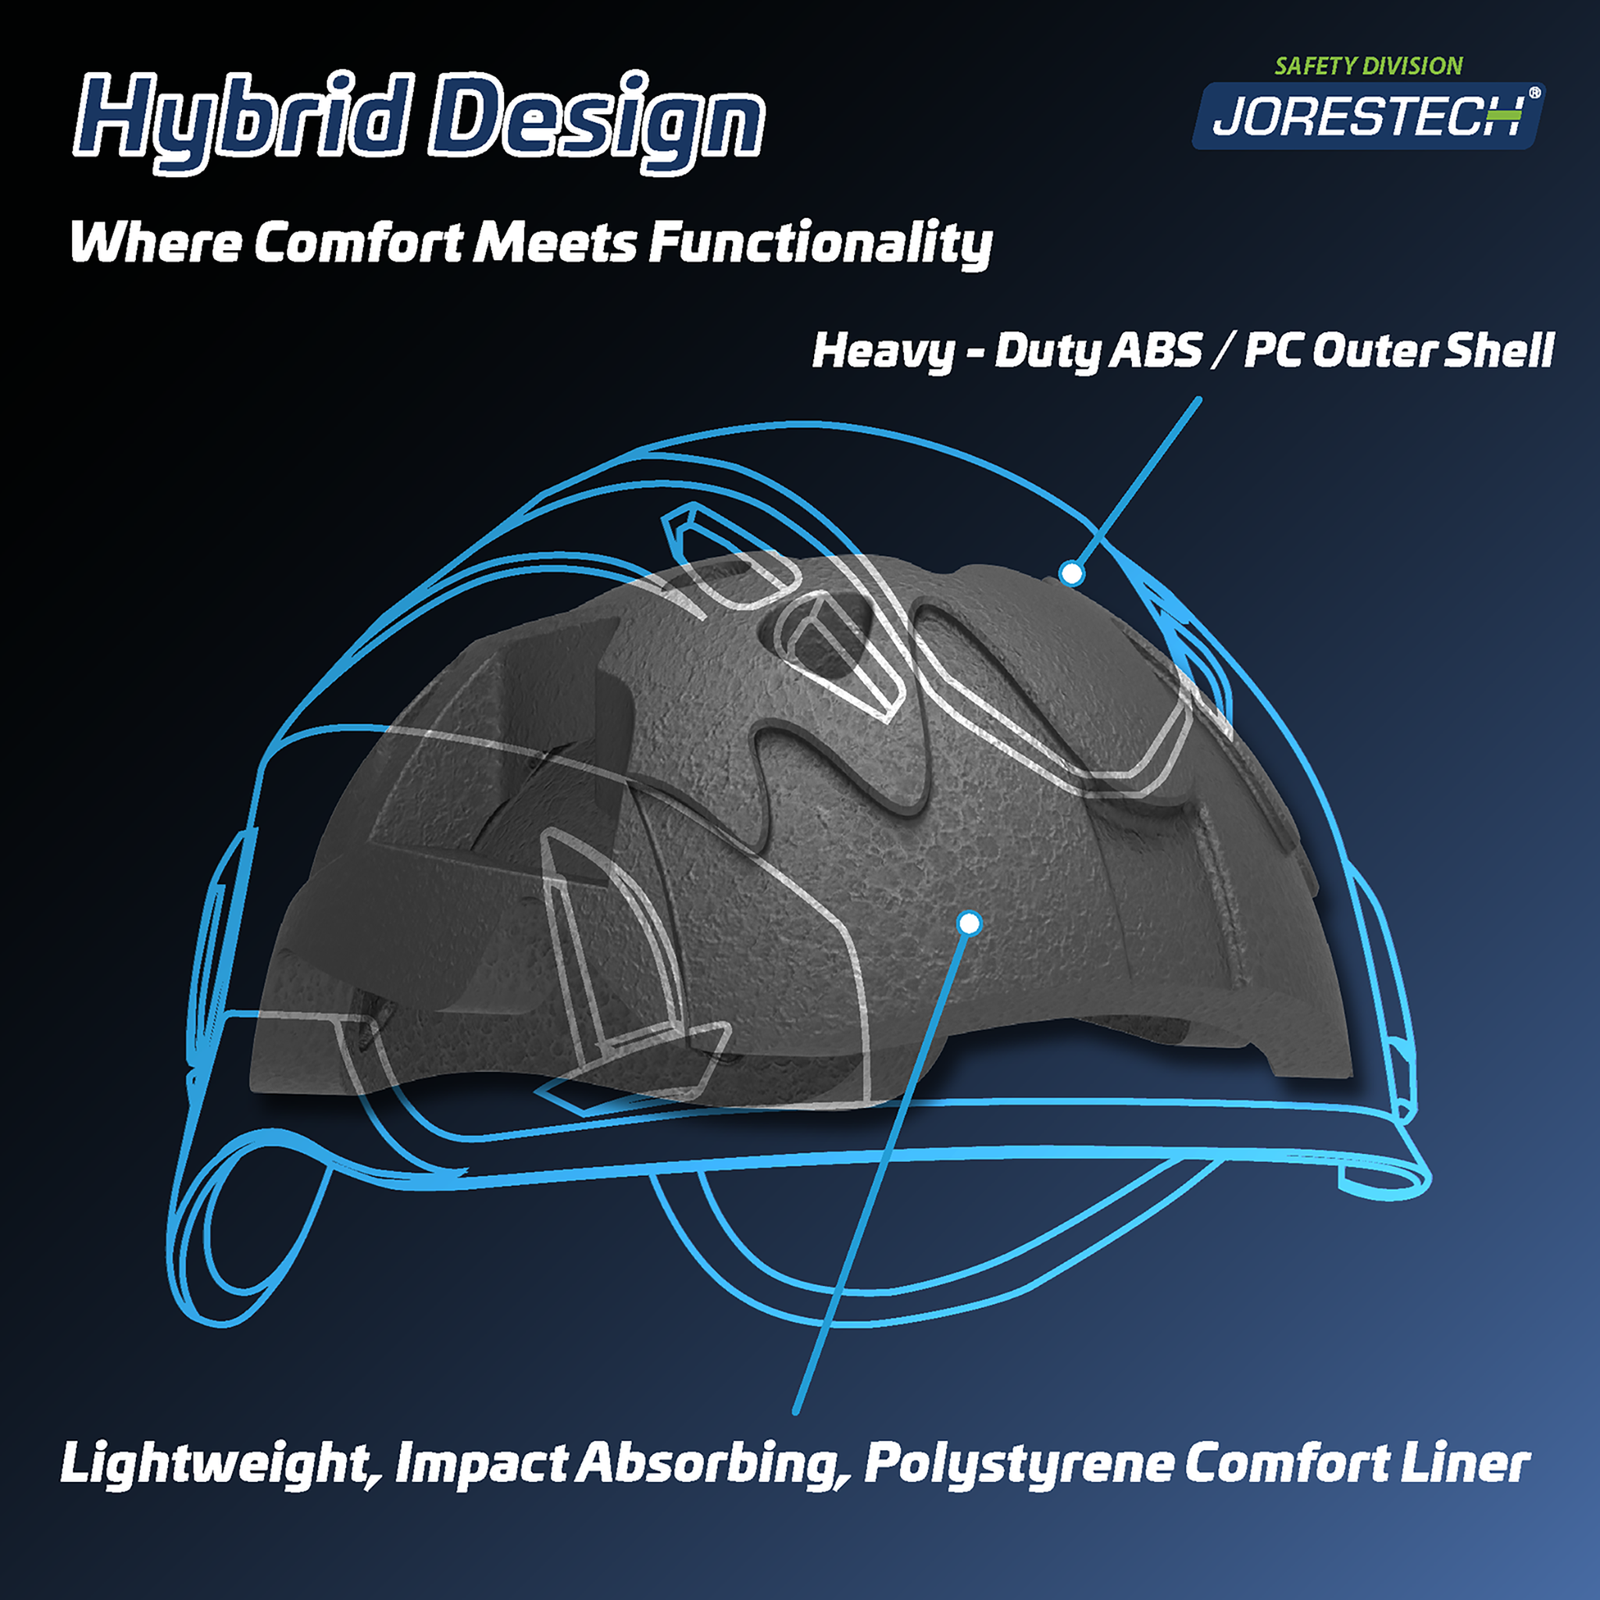 Banner of the inner liner that is part of the JORESTECH hard hat, that offers improved head protection. Text in banner reads:  Hybrid design, where comfort meets functionality . Heavy duty ABS/PC outer shell. Lightweight, impart absorbing, polystyrene comfort liner